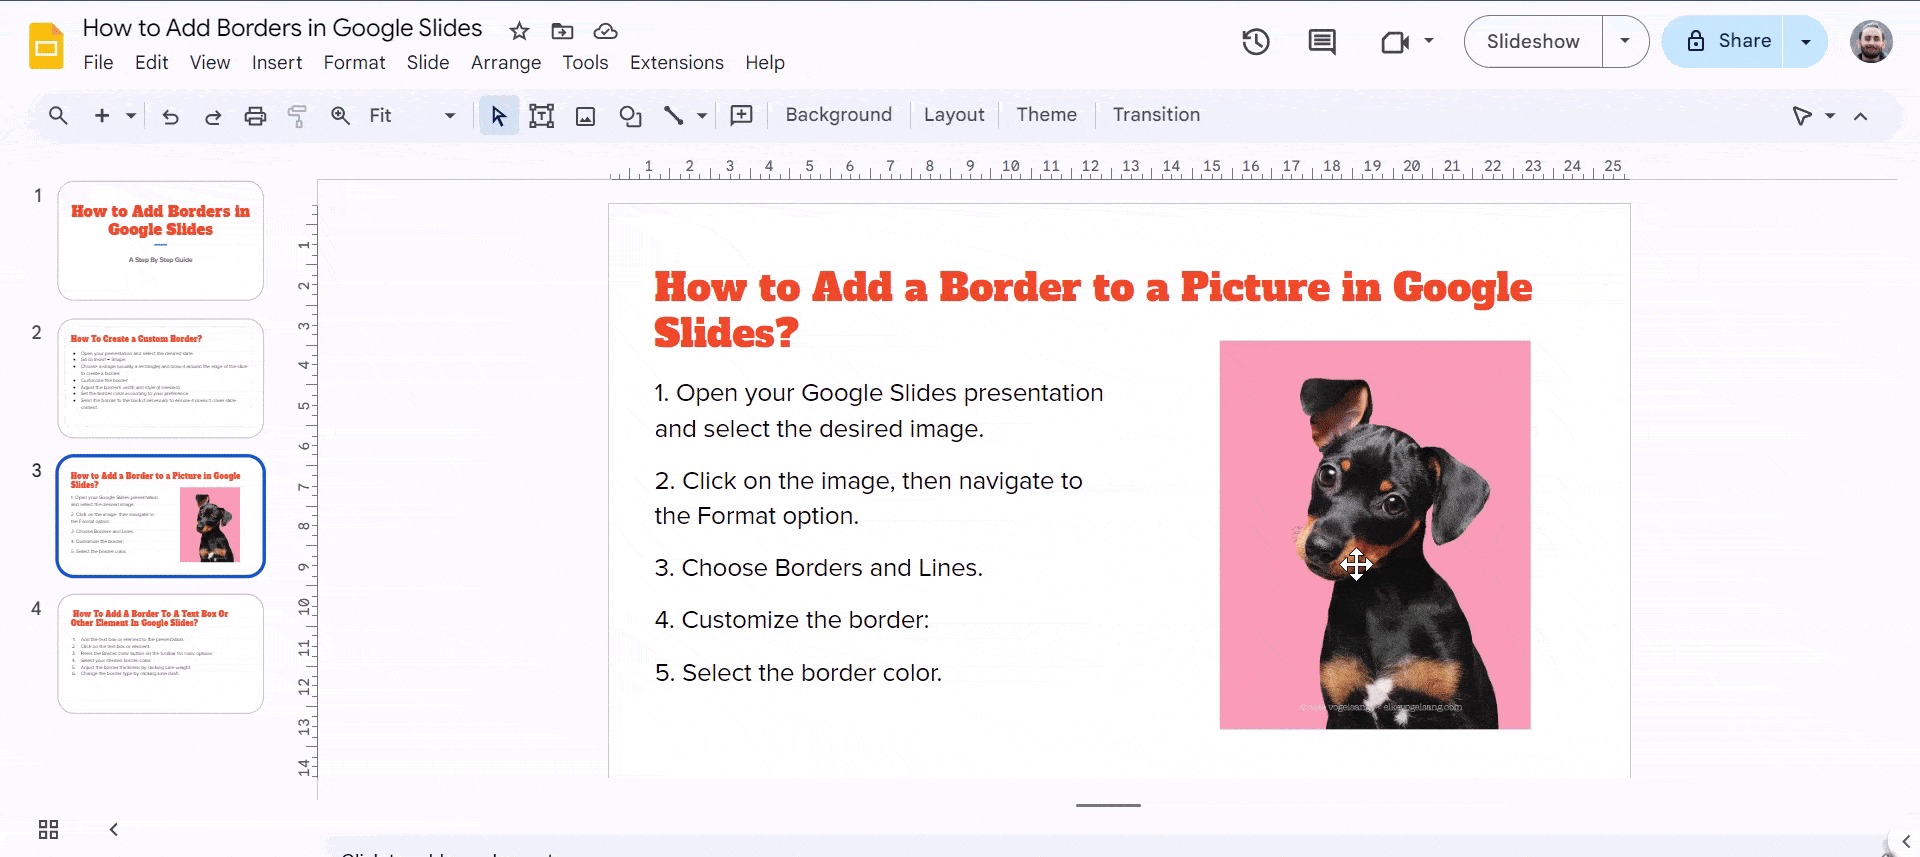 Add a Border to a Picture in Google Slides